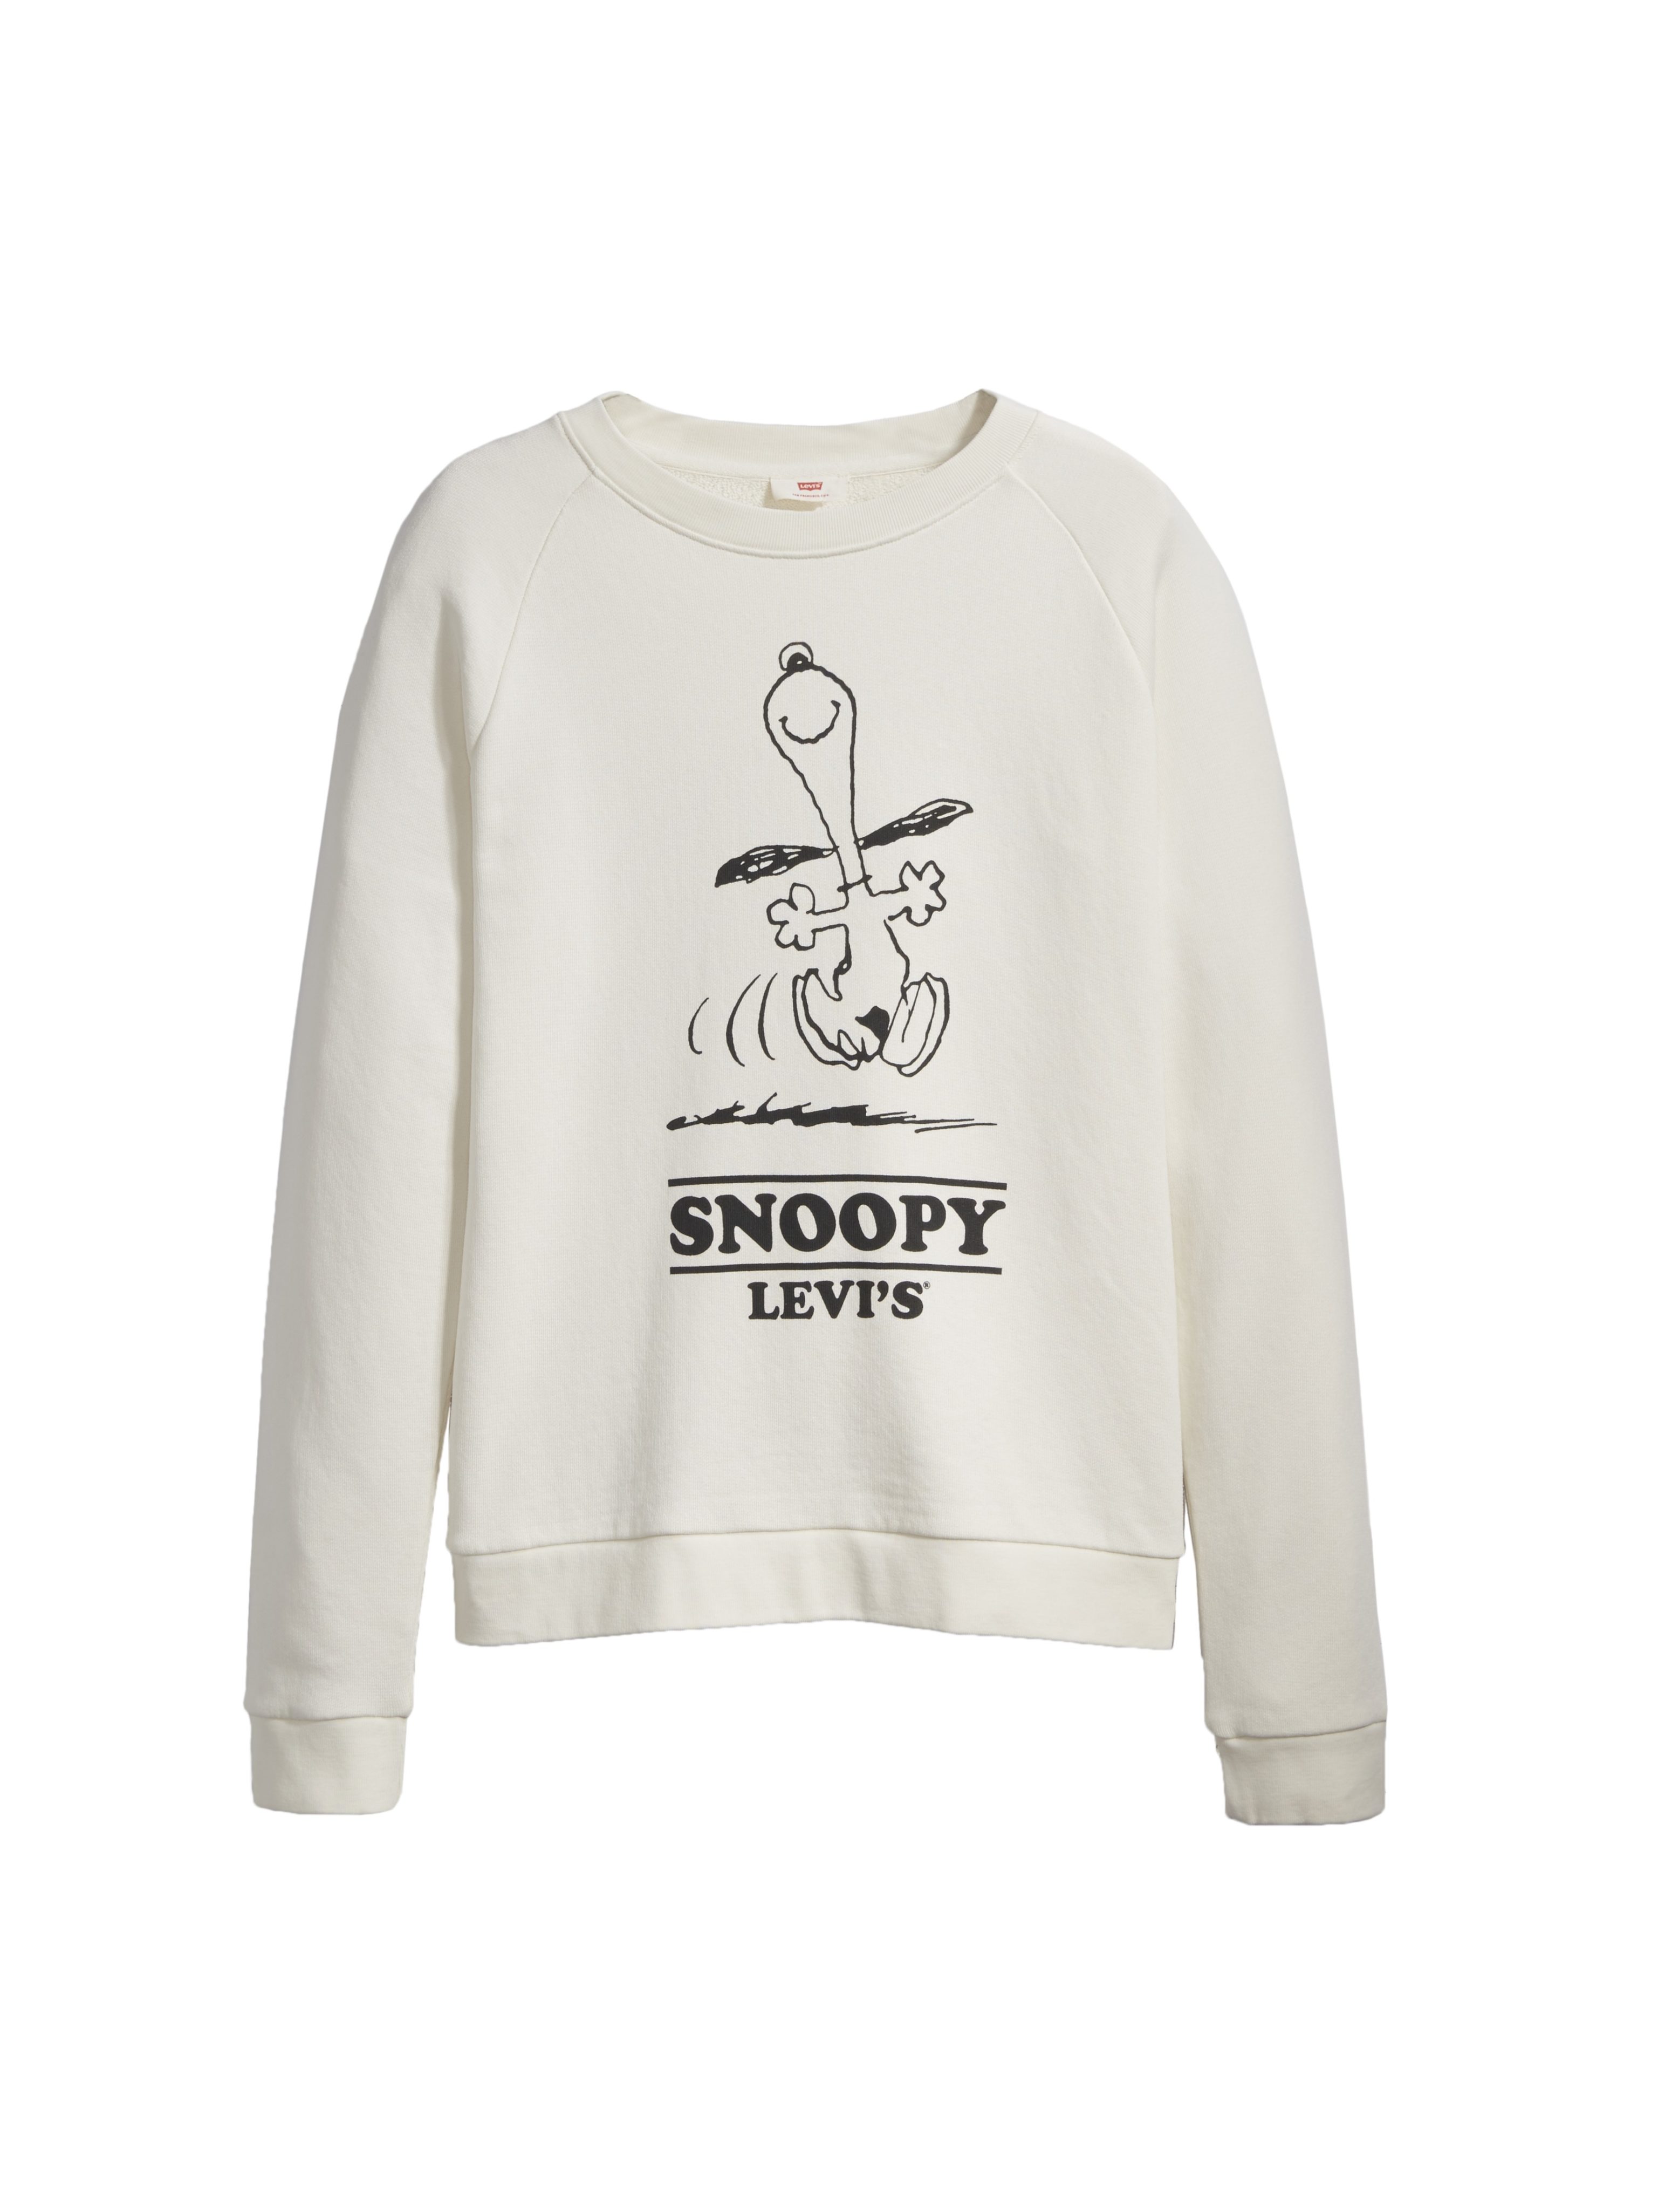 Levi's Reveals Its New Snoopy Capsule Collection - FASHION Magazine